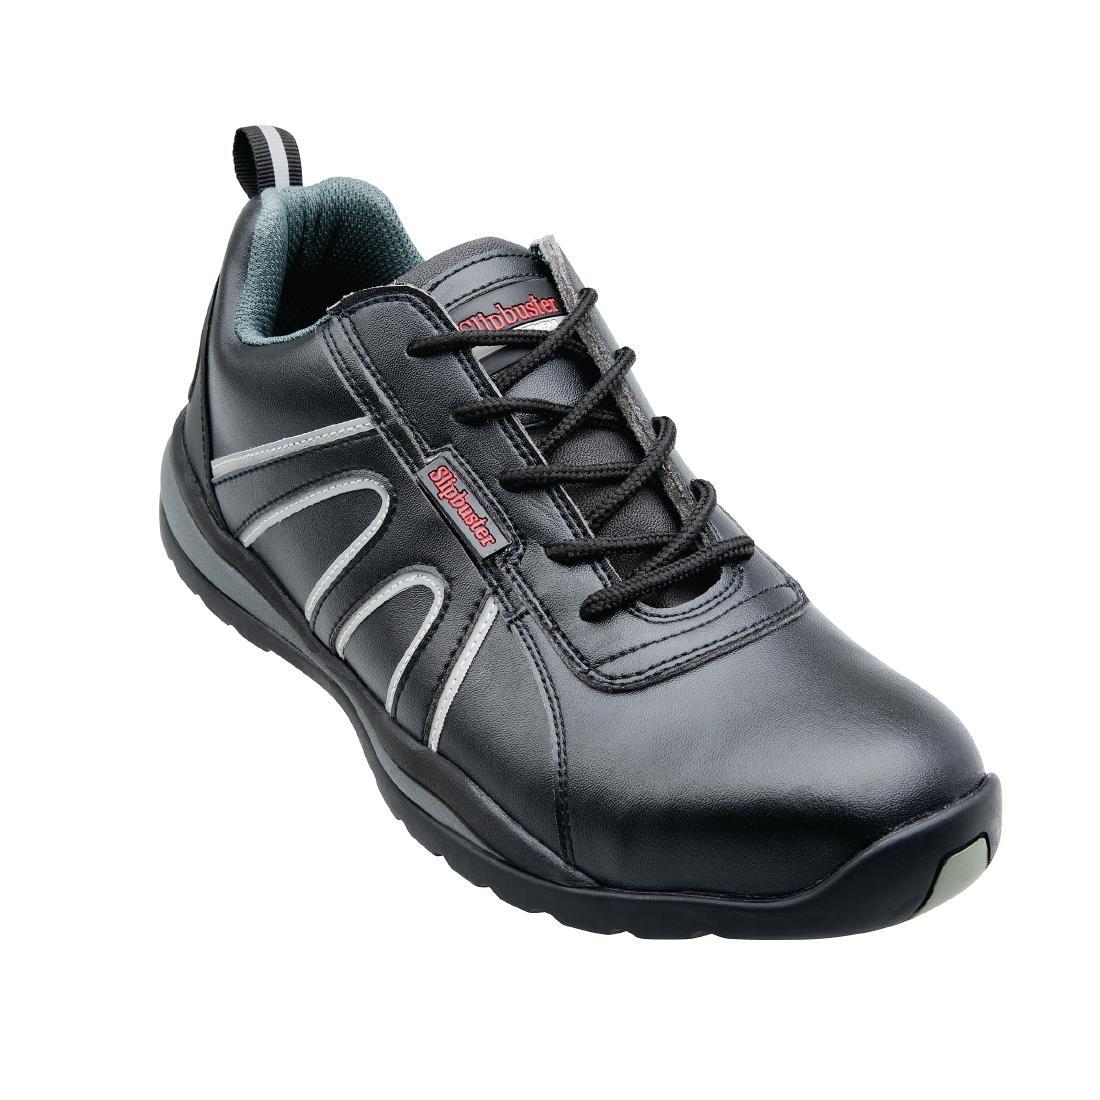 Slipbuster Safety Trainers Black 37 - A708-37  - 5